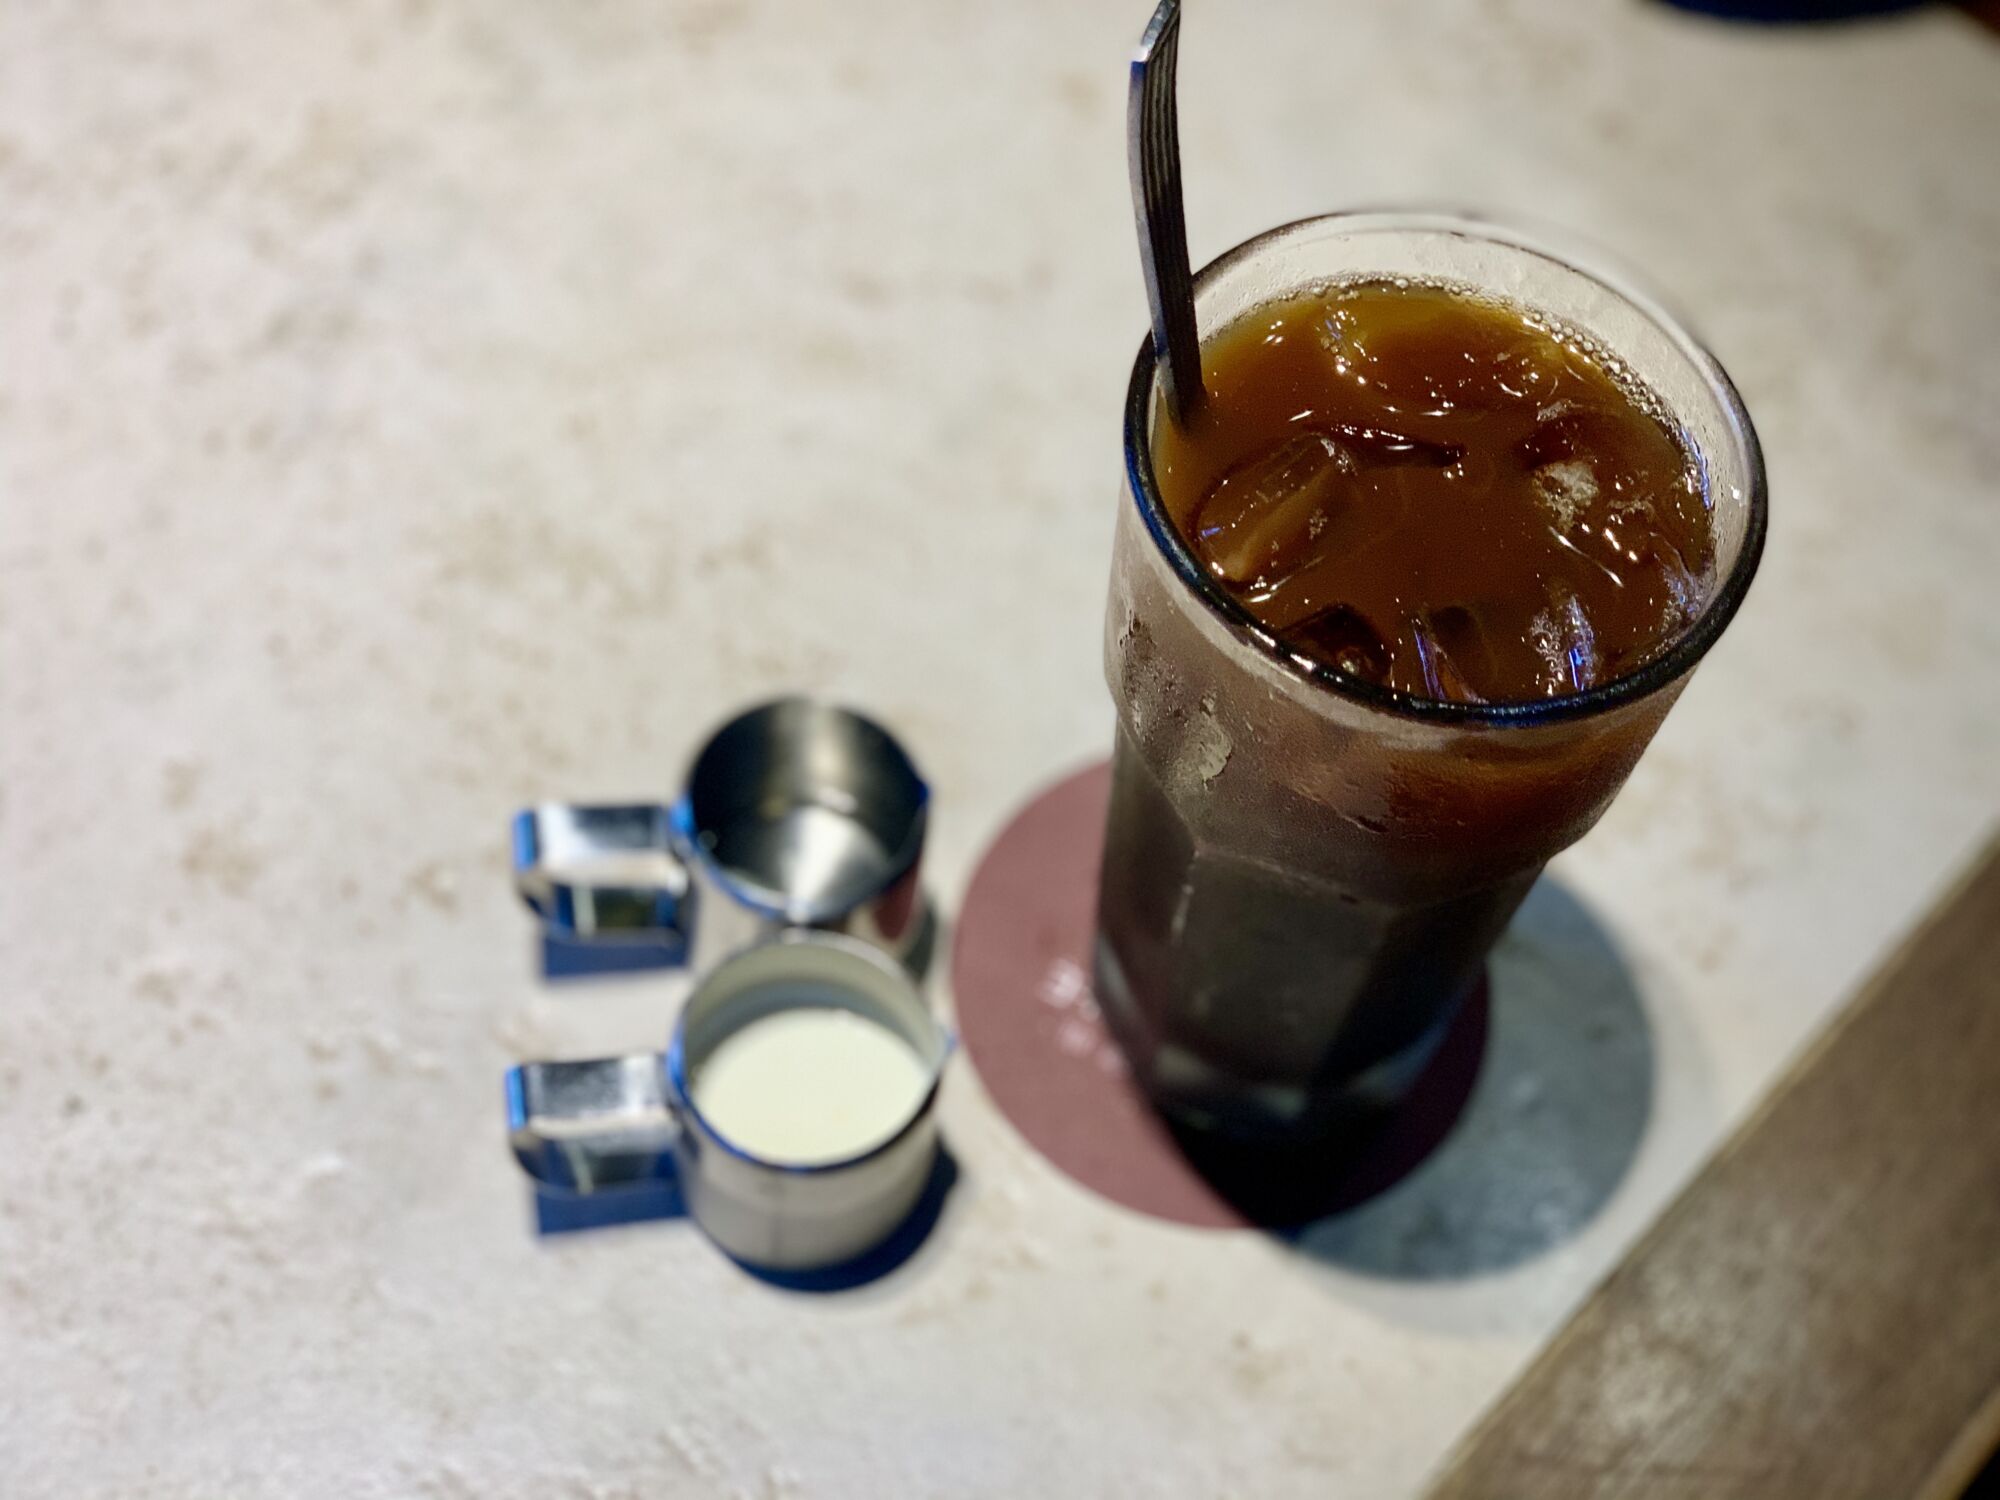 Coffee Milk and Tea from Alves Cafe Mirrored Image Macau Lifestyle